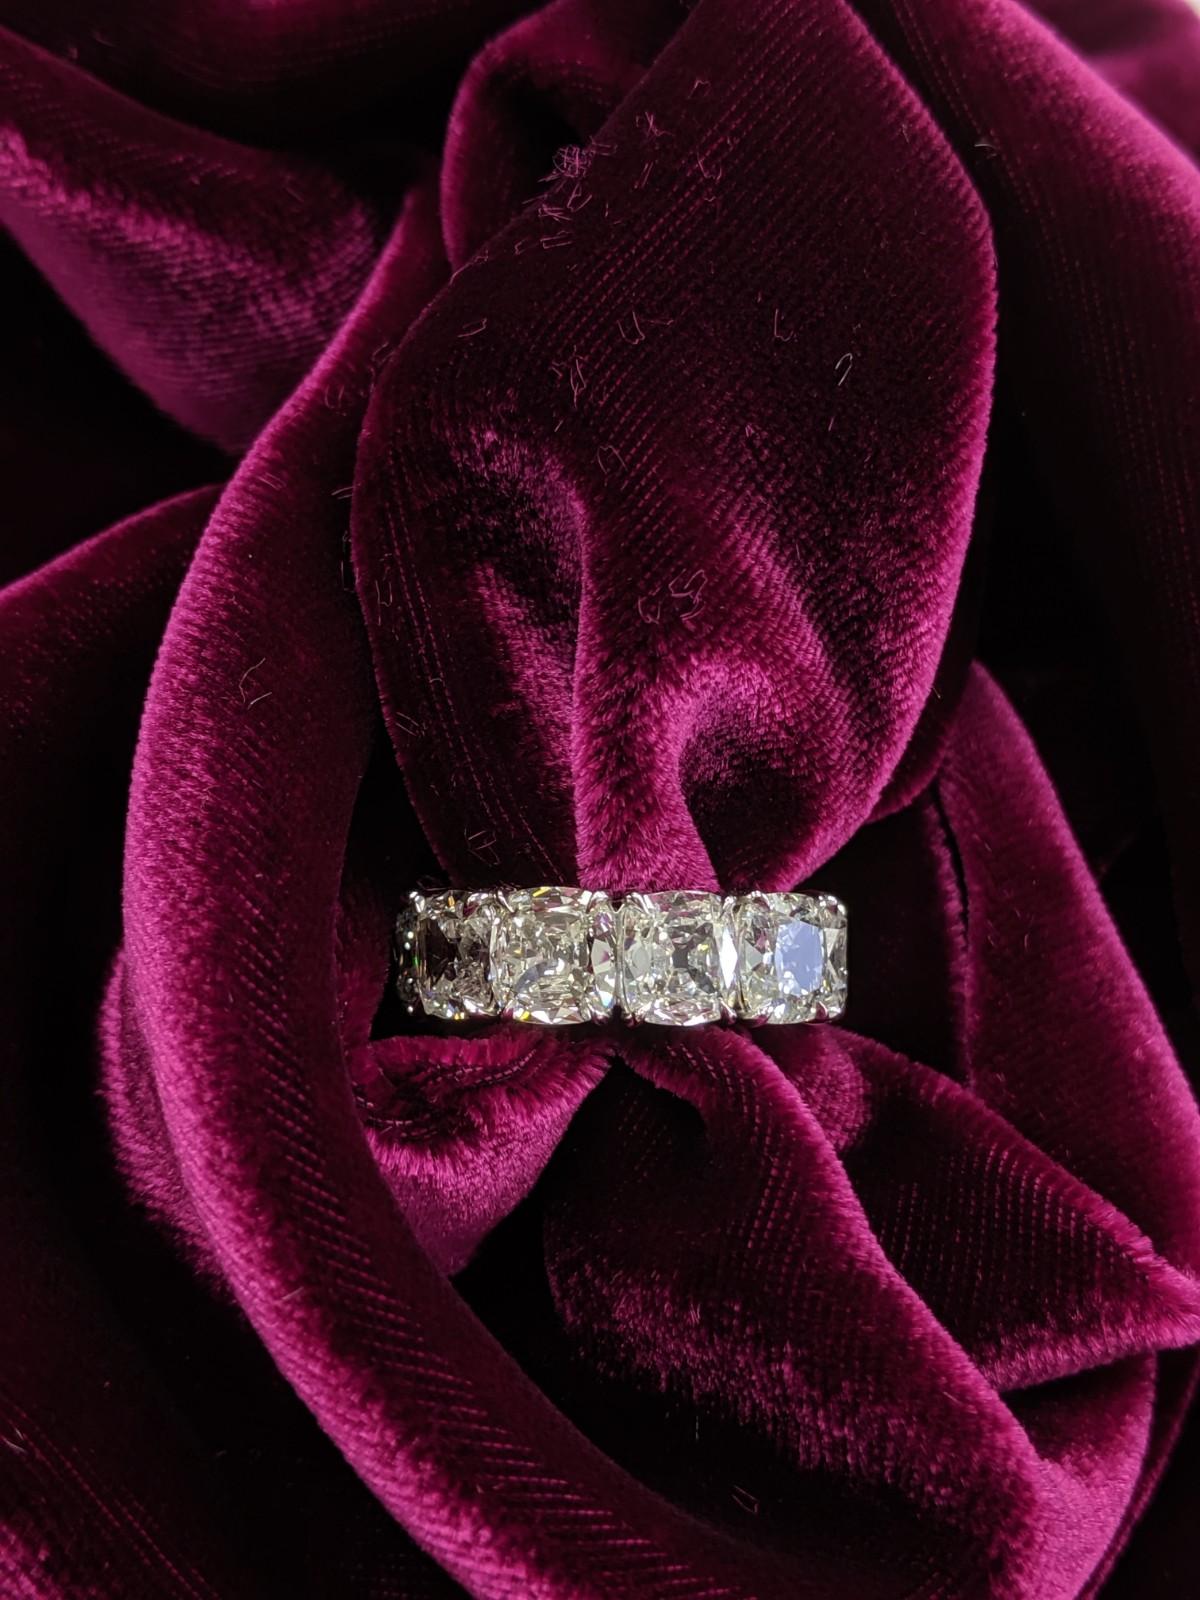 This spectacular 11.42 carat weight cushion cut diamond eternity band is comprised of traditional cushion cut diamonds approximately one carat each D-G color and VS-SI clarity.  Video and GIA grading certficates available upon request.  Each diamond